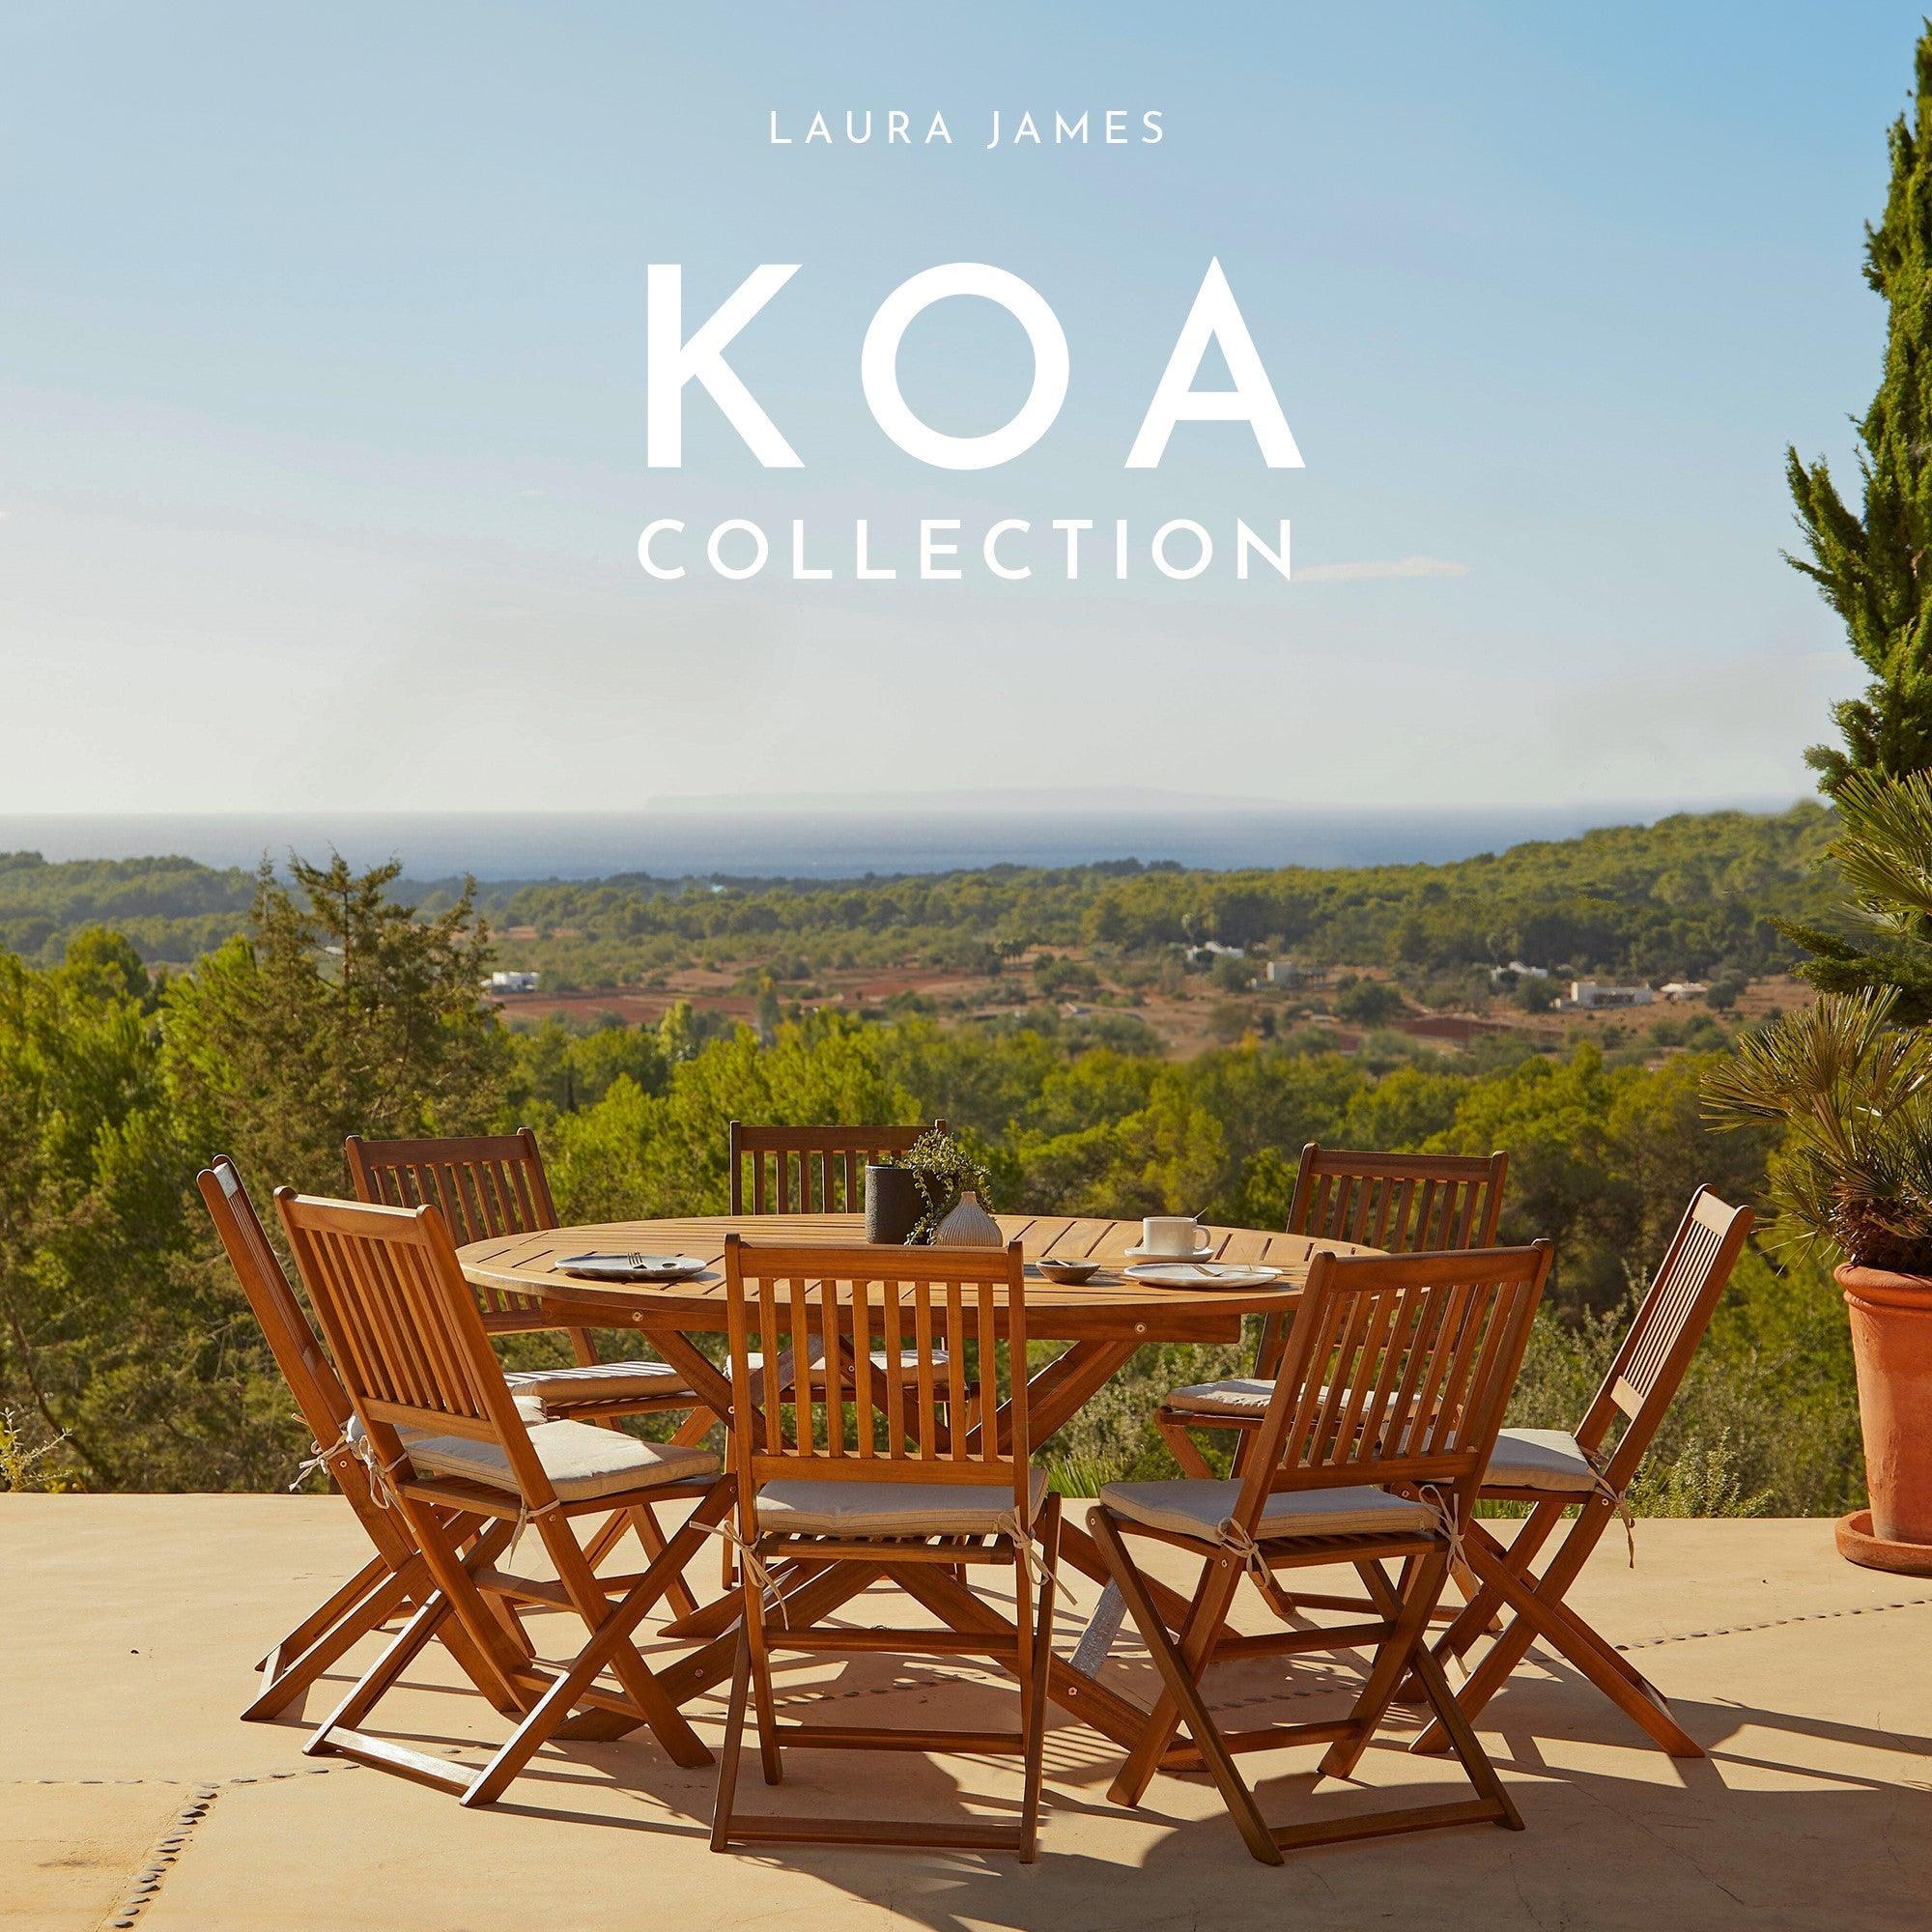 Introducing the KOA Collection from Laura James - Laura James